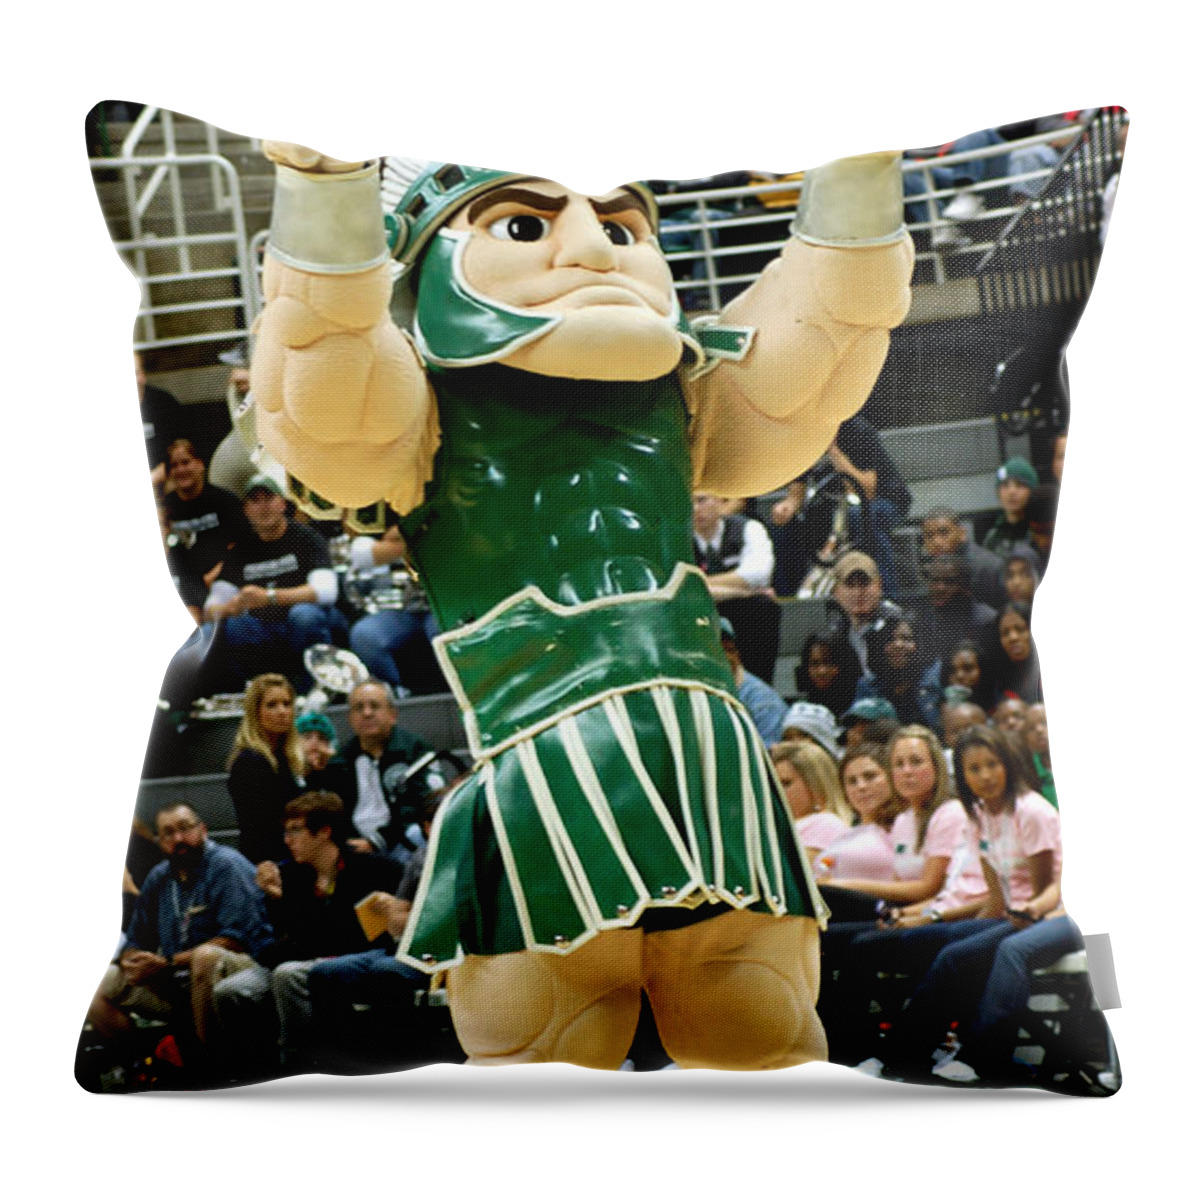 Michigan State University Throw Pillow featuring the photograph Sparty at Basketball Game by John McGraw